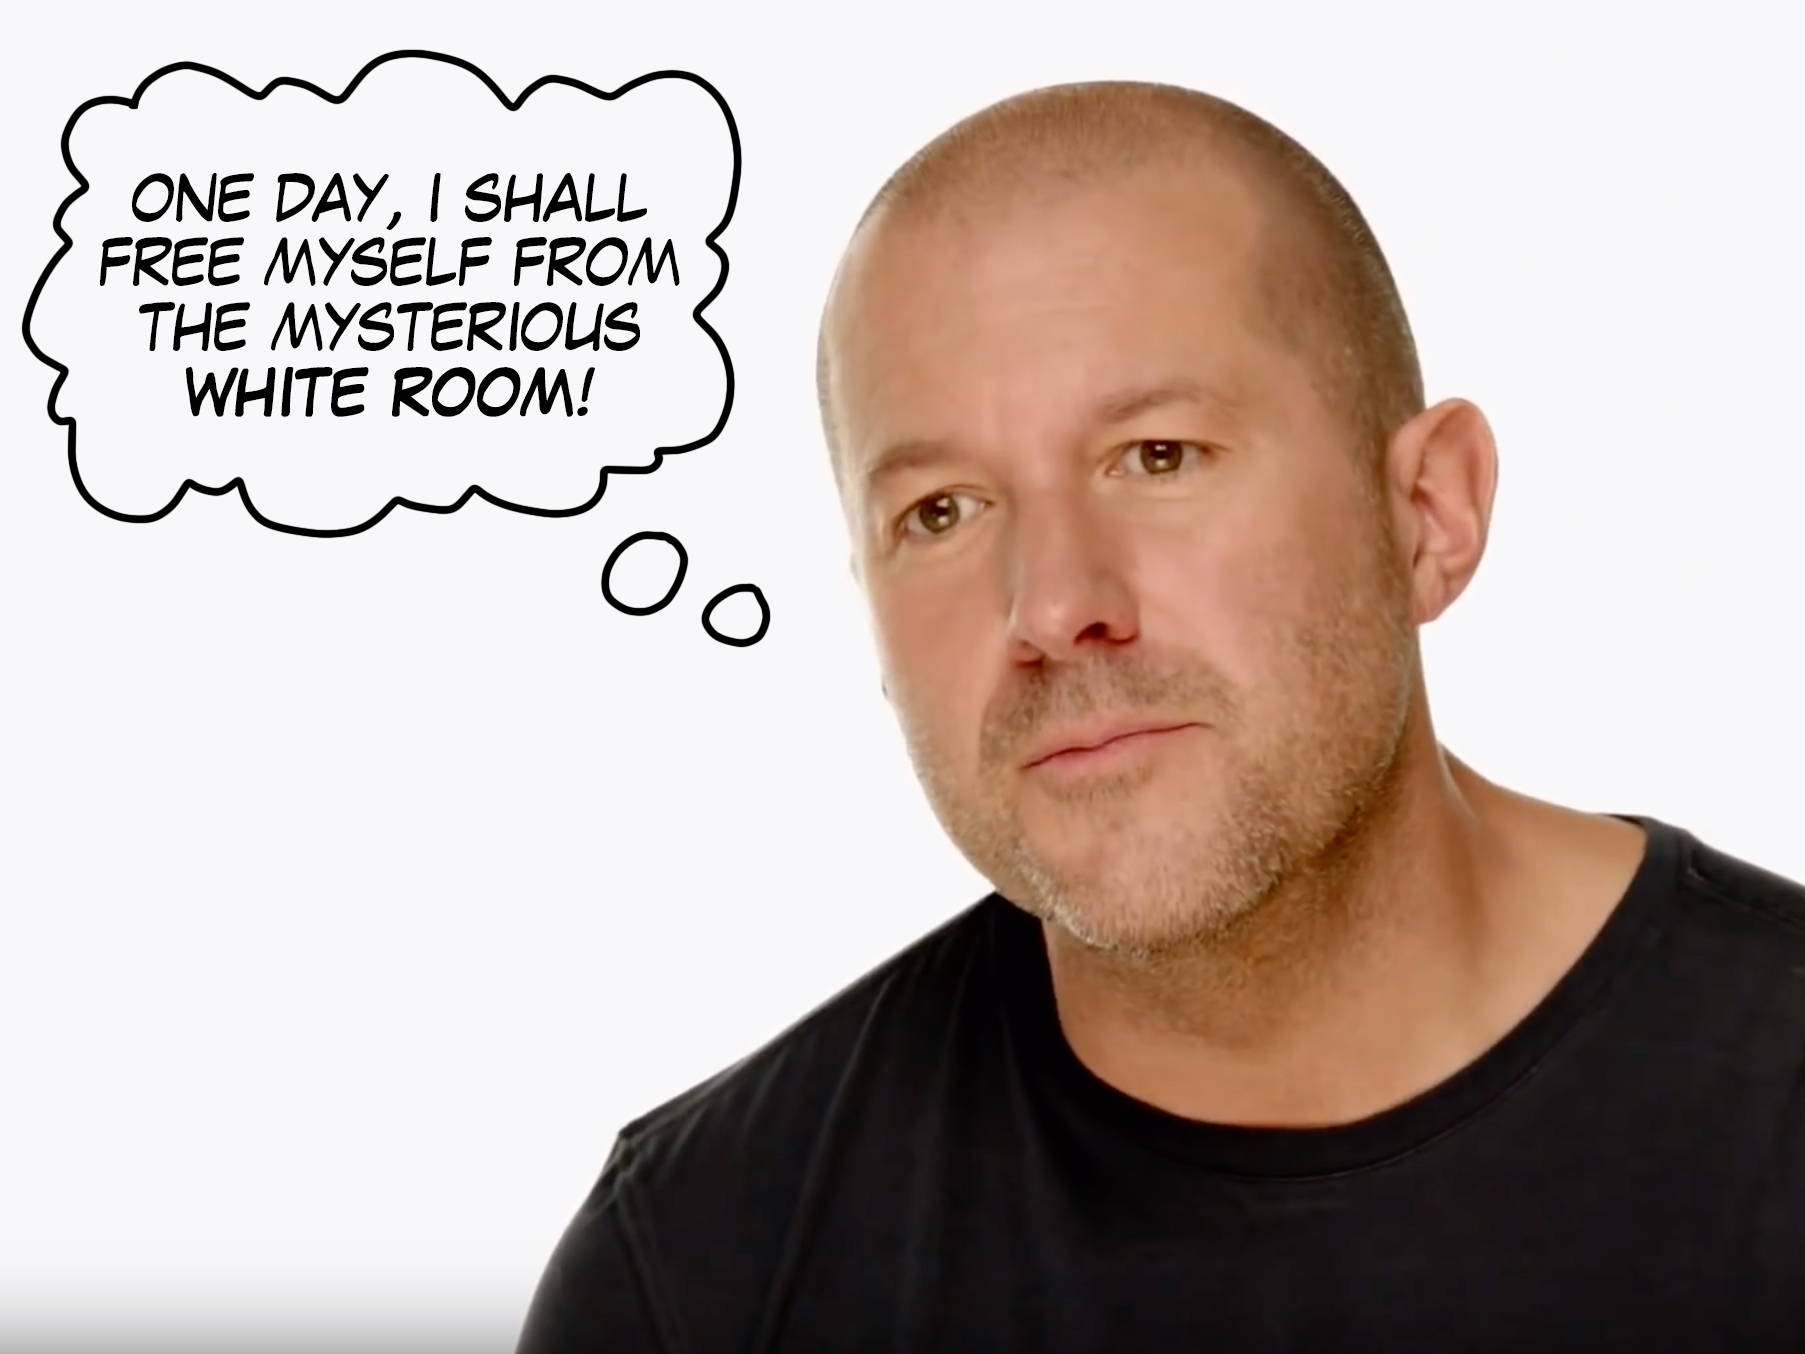 The end of Jony Ive in the white room